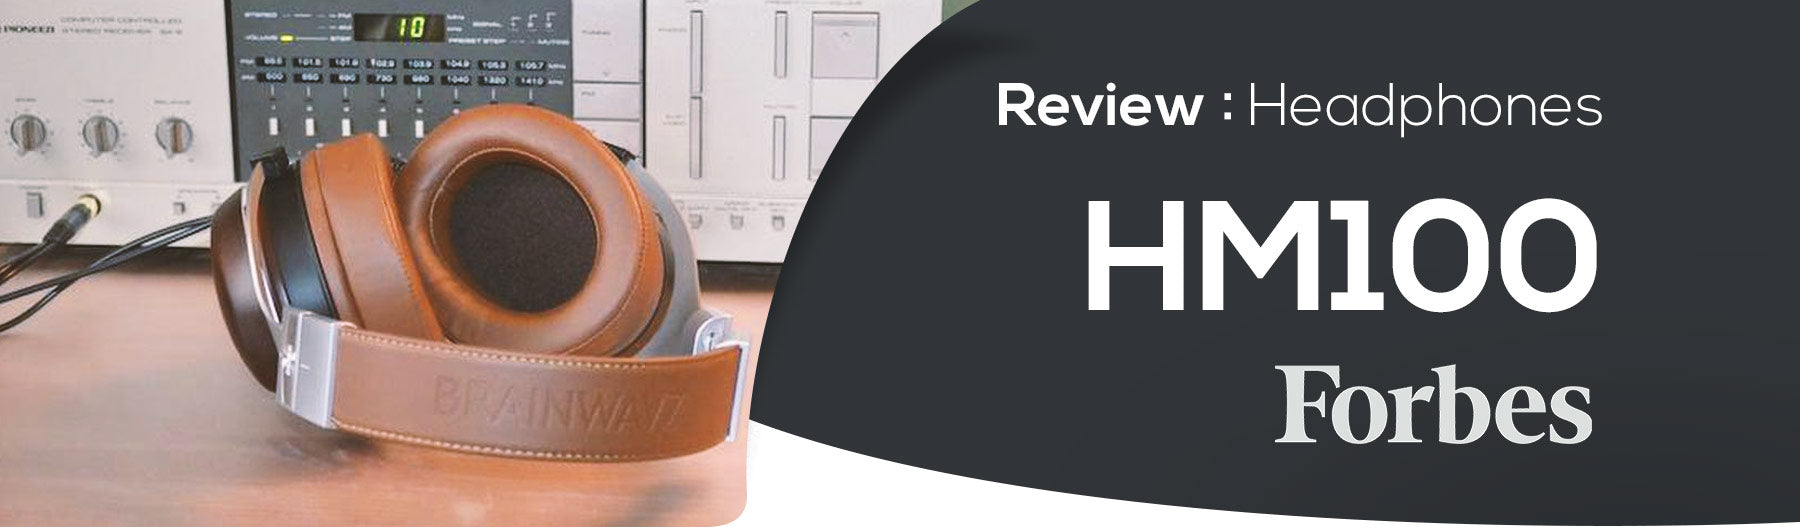 HM100 - The Forbes review